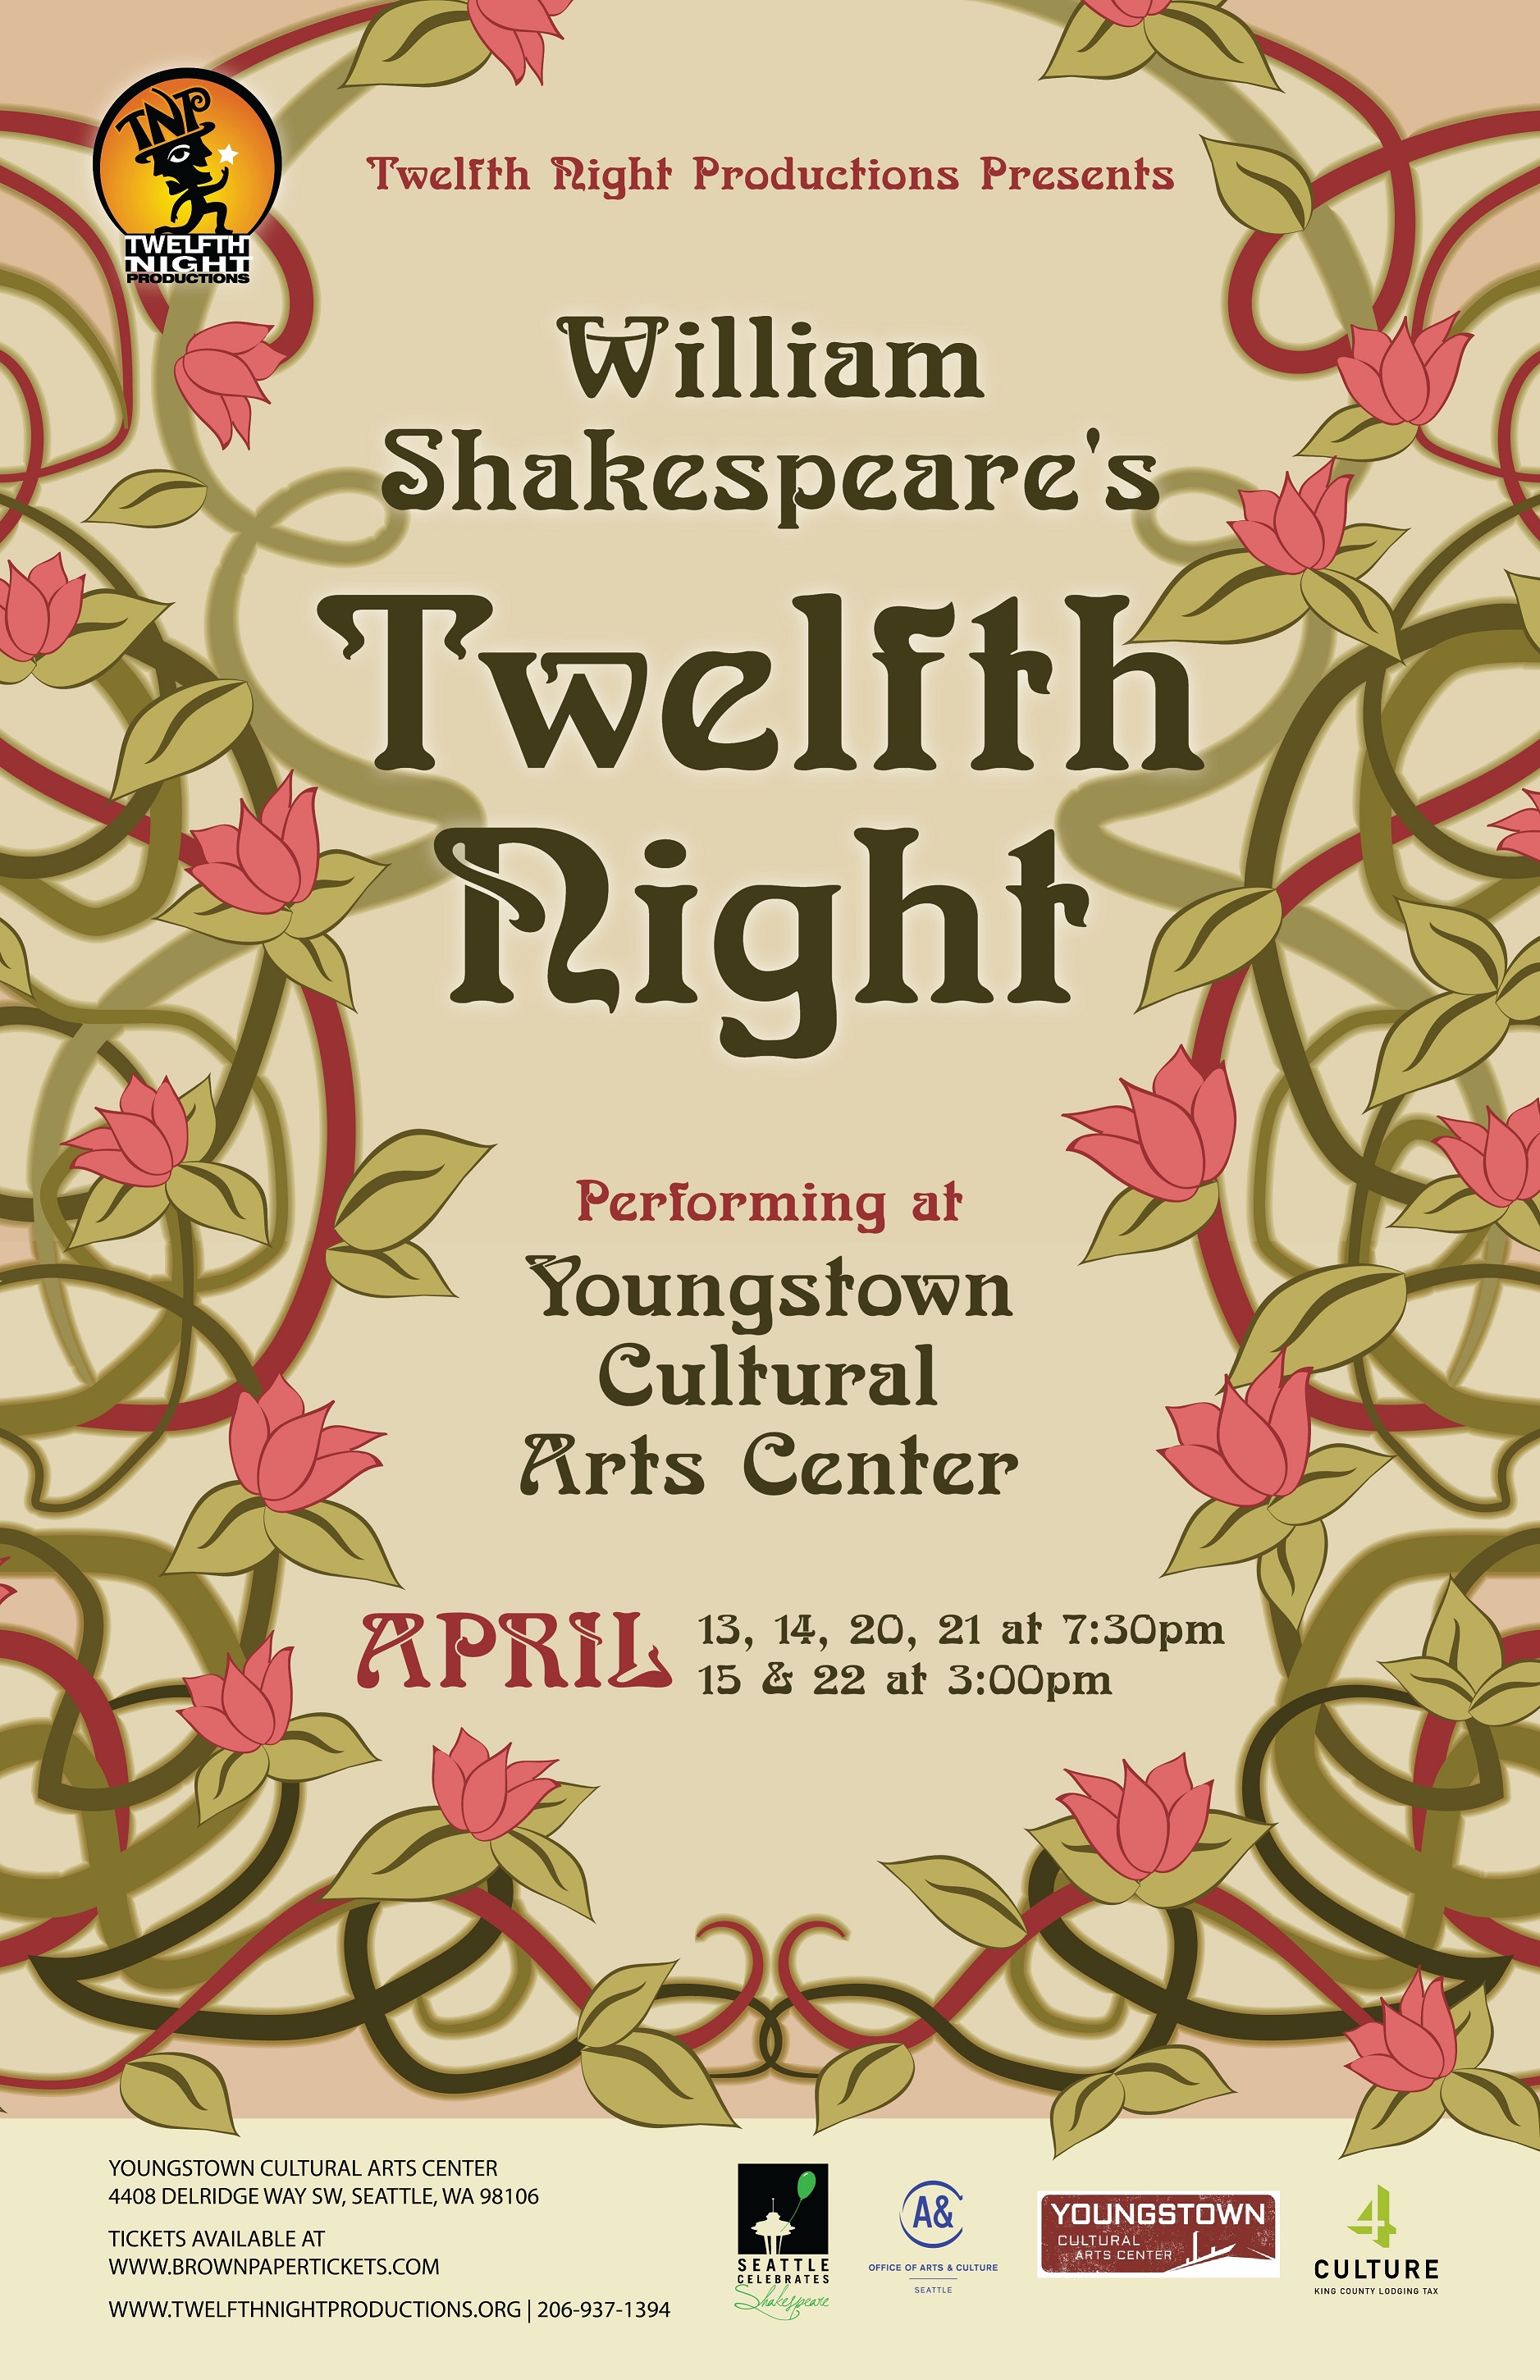 Twelfth Night Productions Celebrates Shakespeare With Twelfth Night